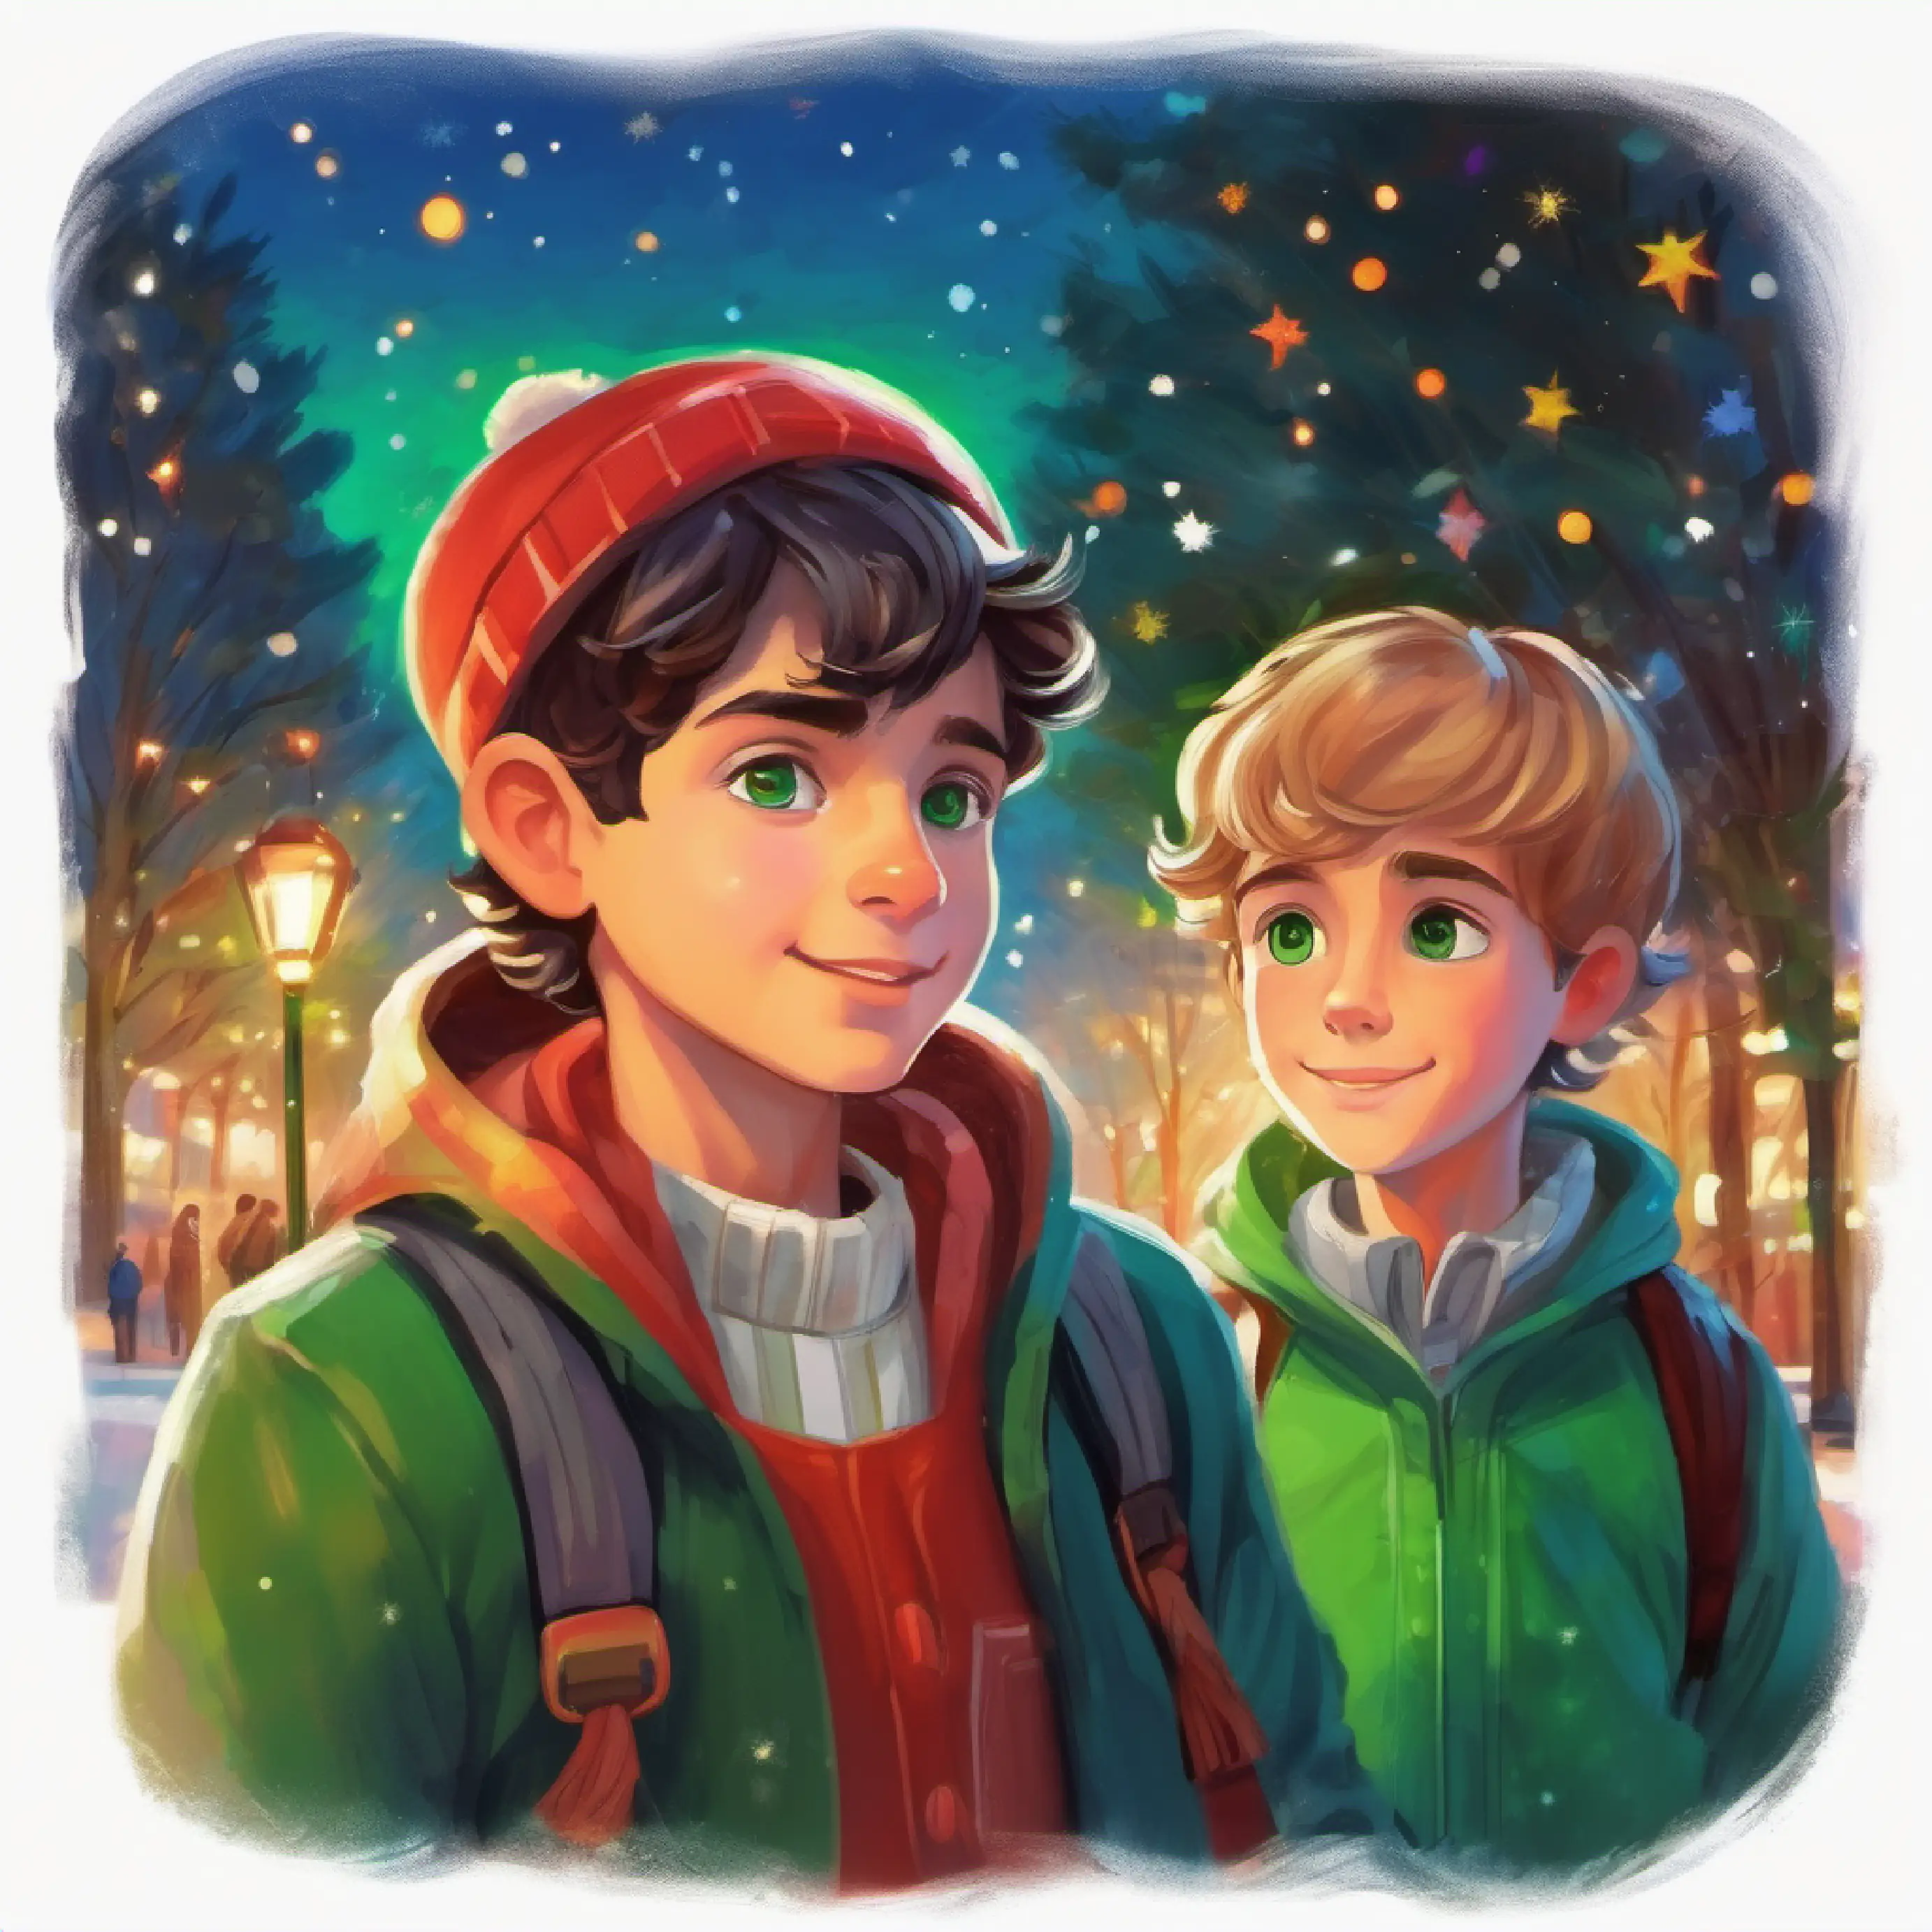 Curious boy with green eyes, friendly and open-minded expresses his friendship to Transgender boy with hopeful eyes, seeking acceptance in the park.